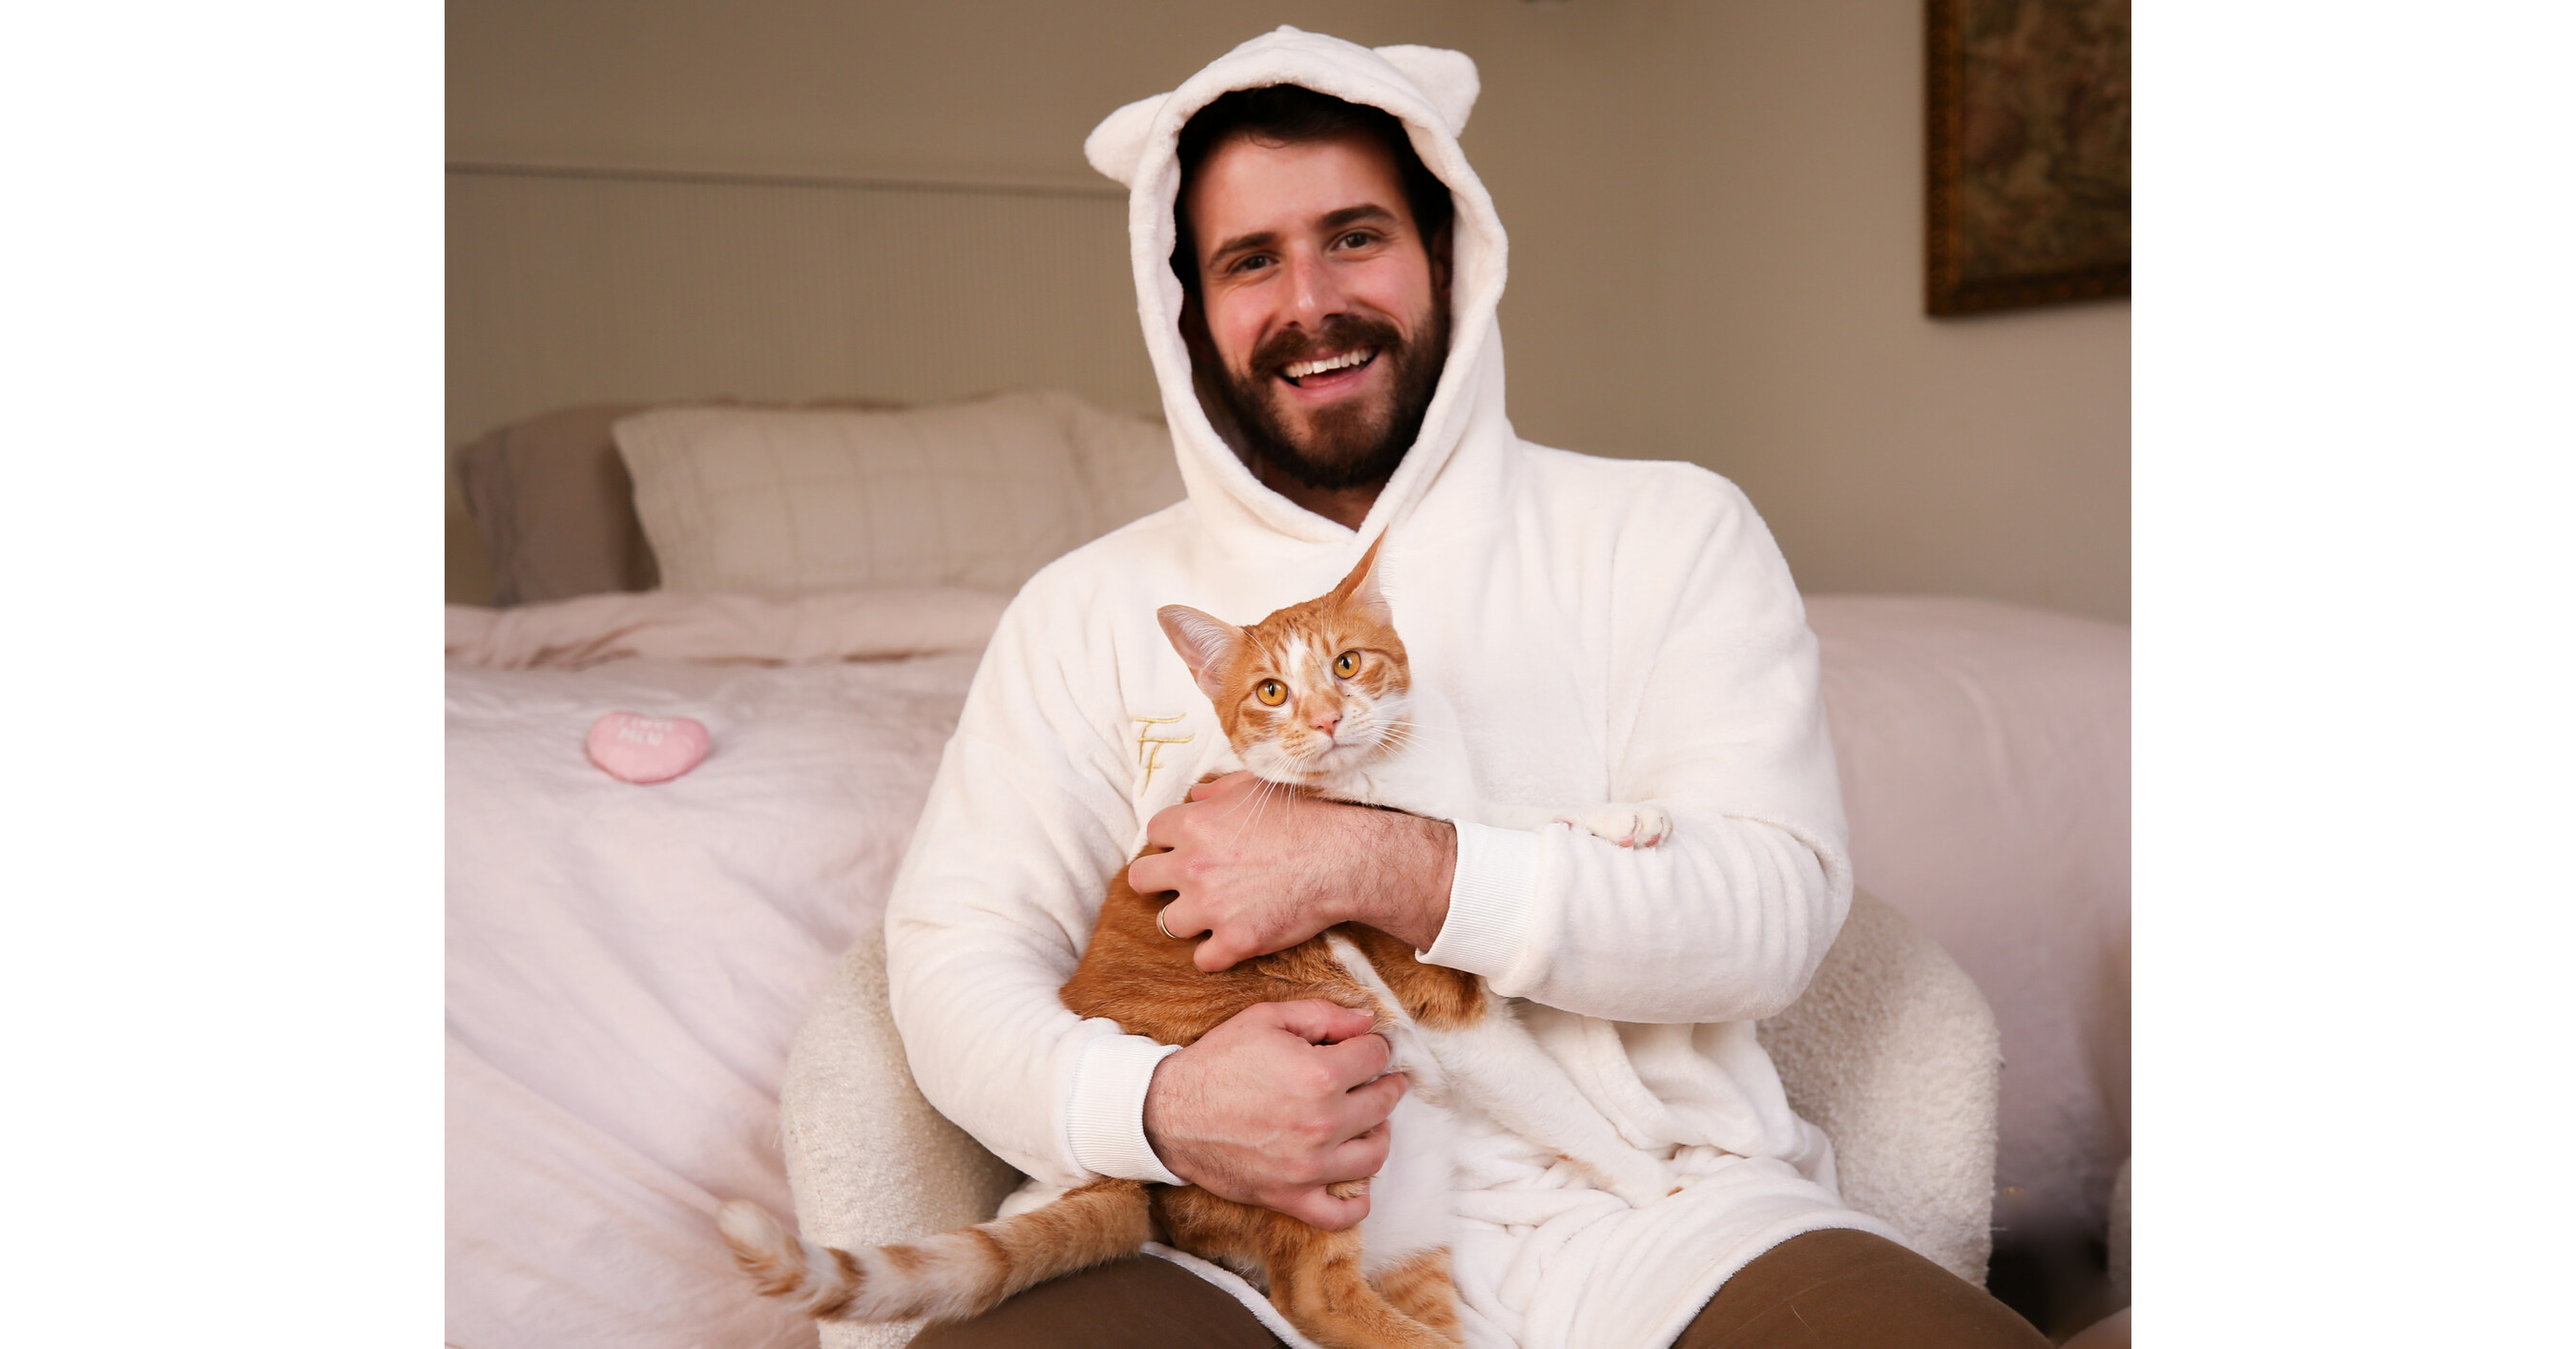 Fancy Feast Launches Limited-Edition “Cuddle Collection” for Cat Lovers